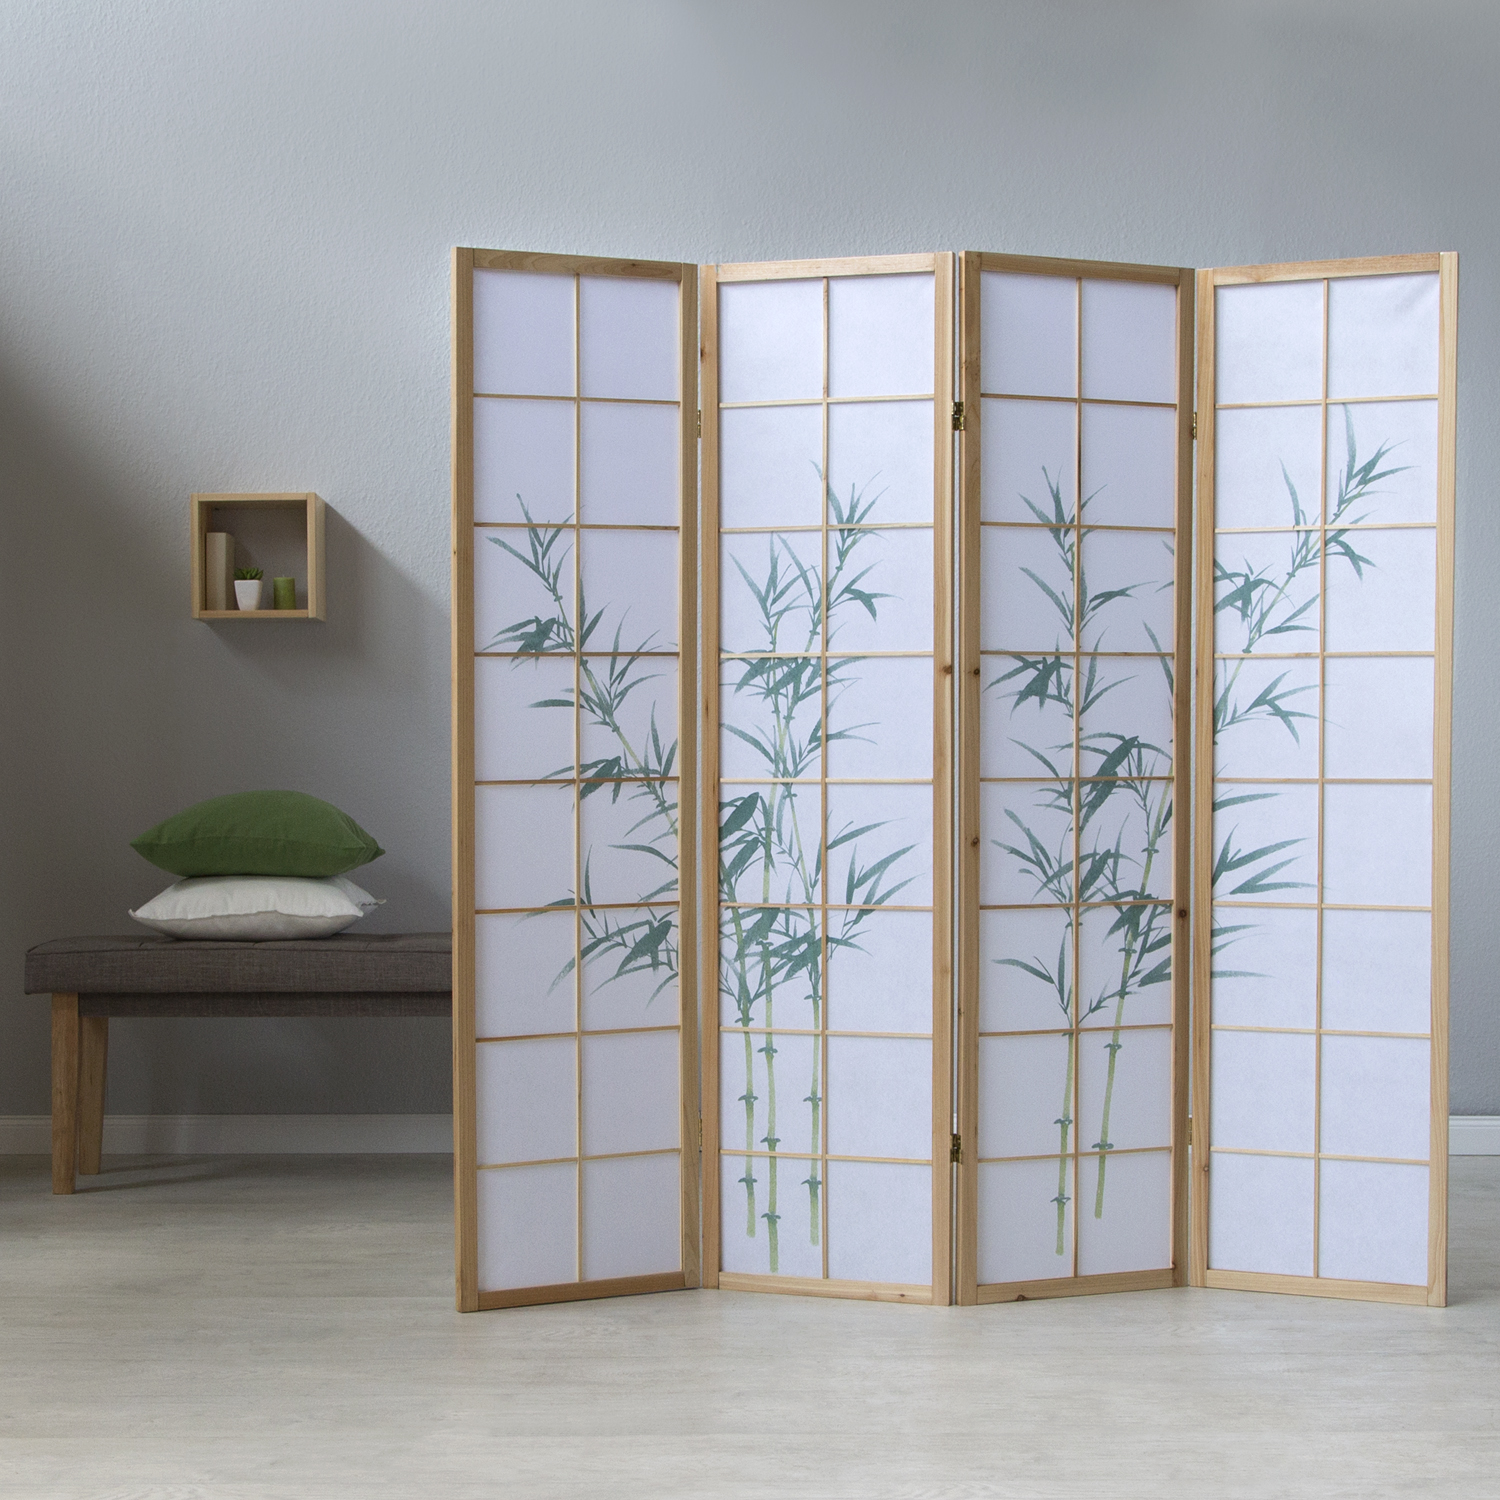 Paravent room divider 4 parts, wood natural, rice paper white, bamboo pattern, height 175 cm	